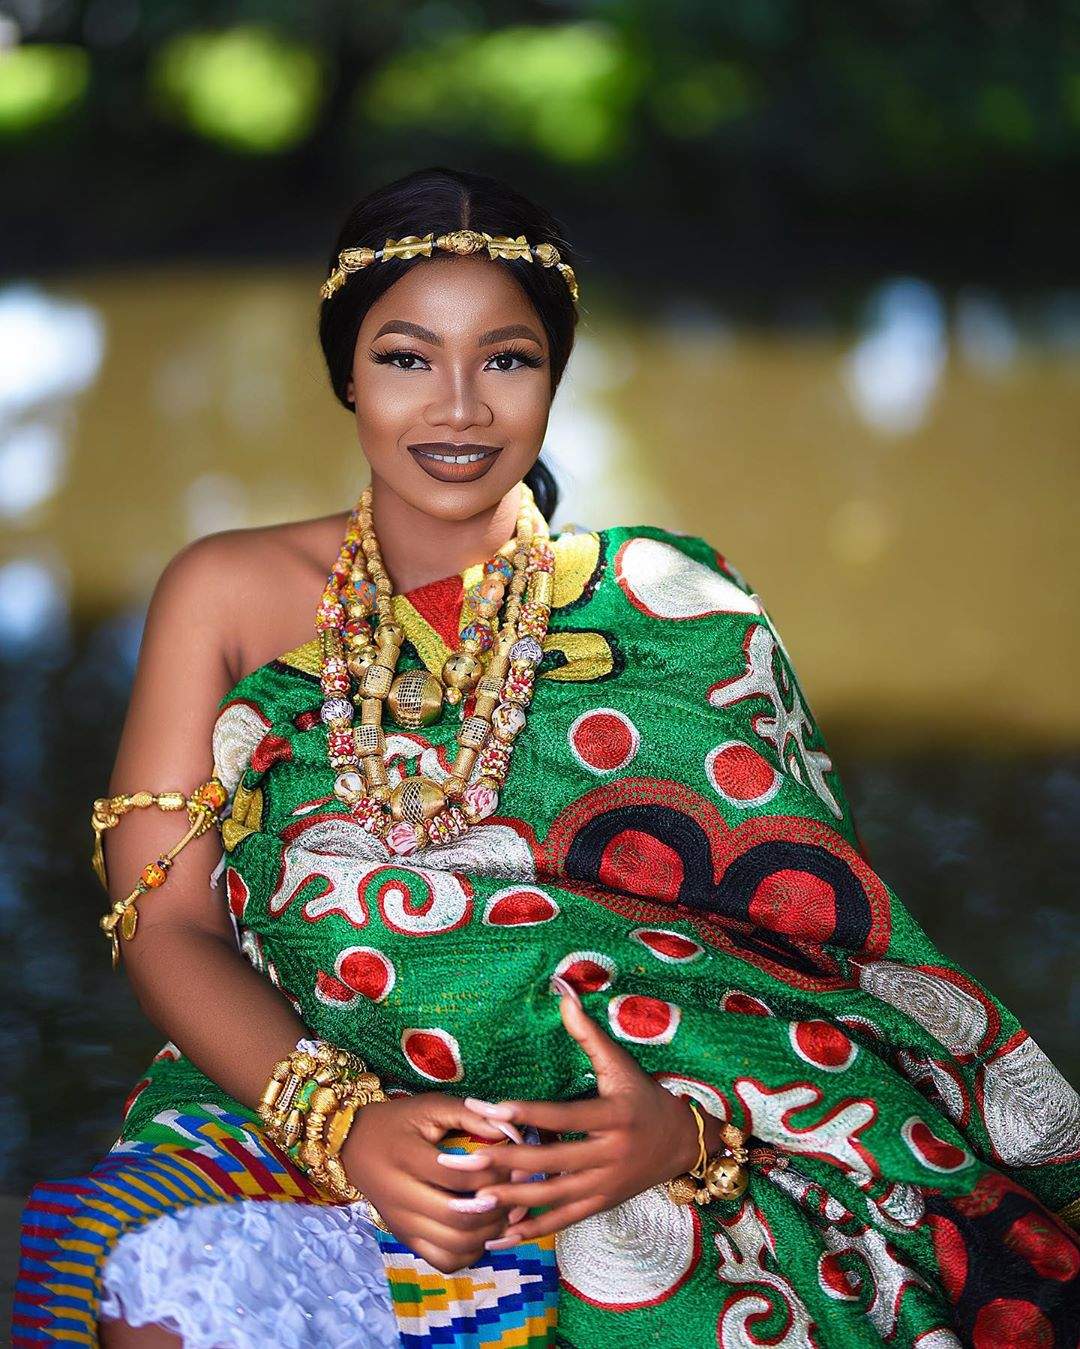 Tacha sues Blessing Okoro for character defamation, demands N20m compensation